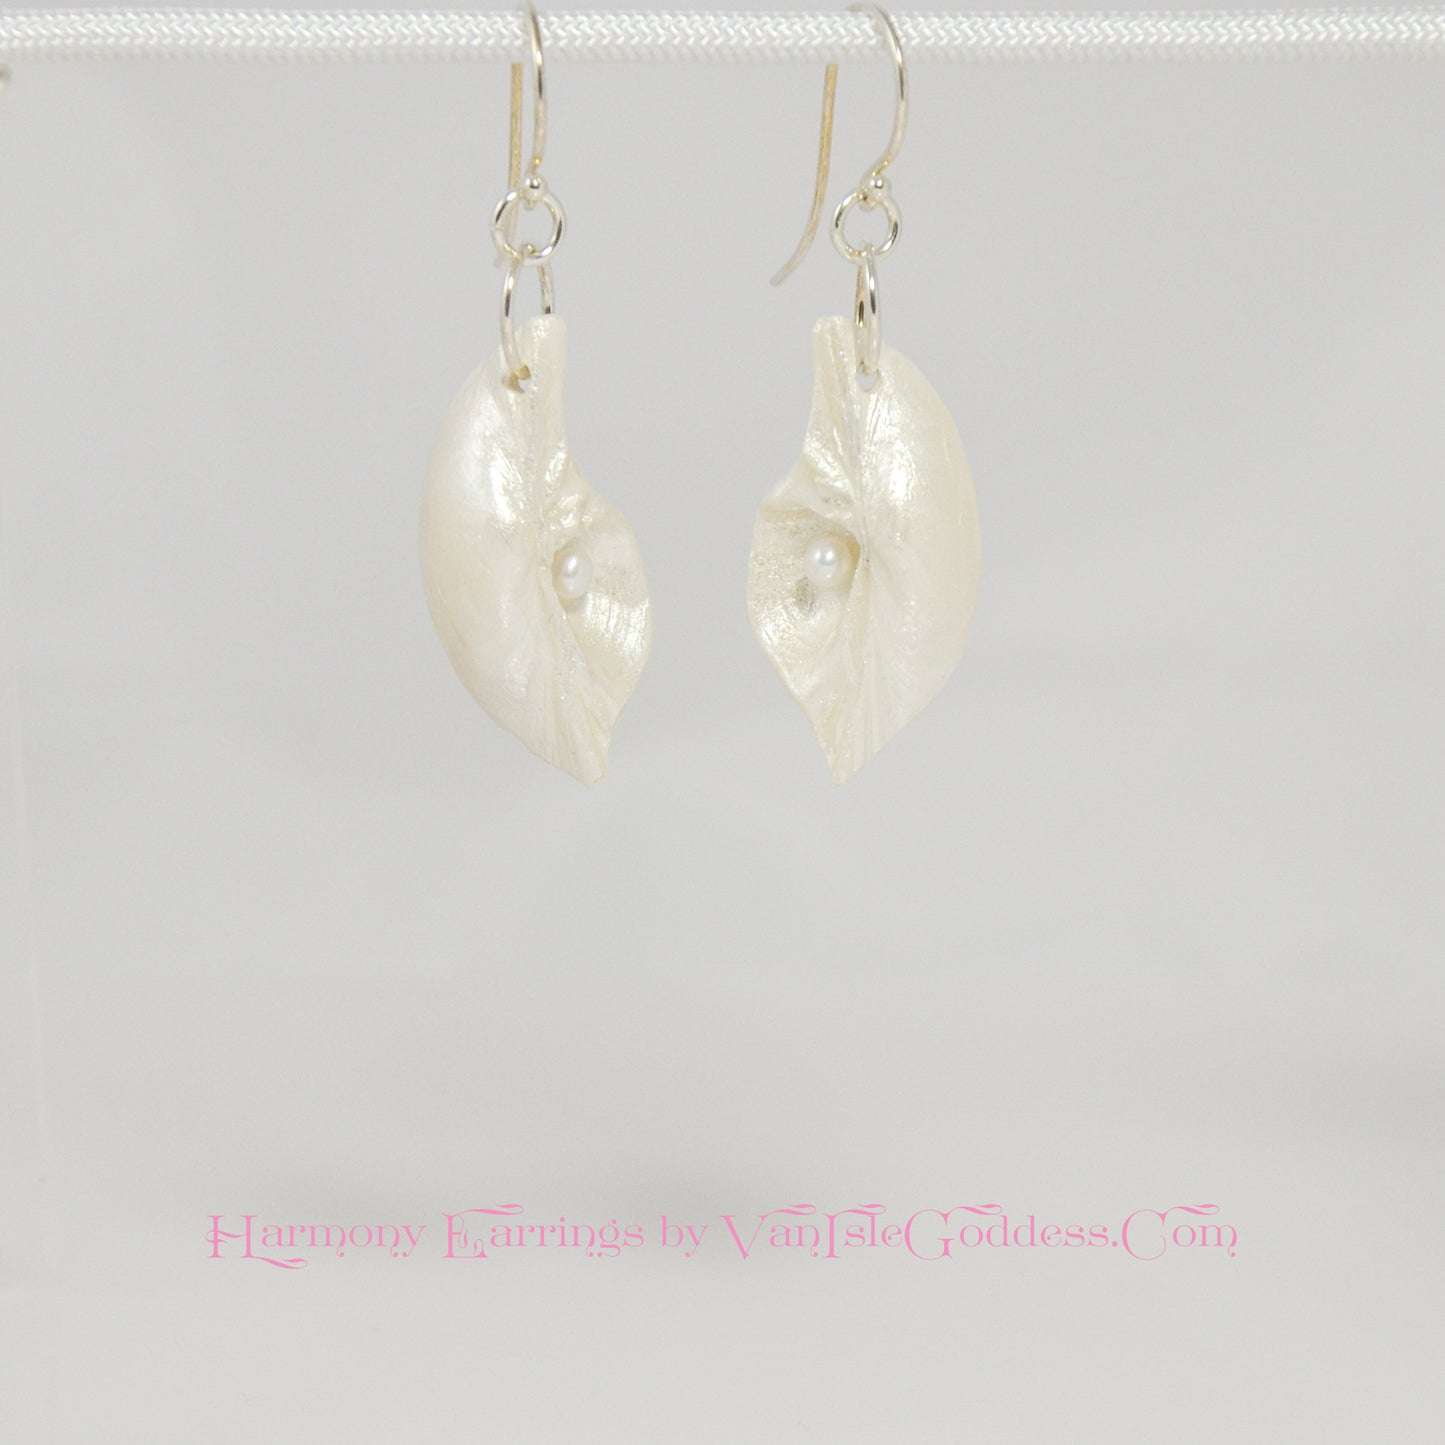 Harmony Earrings made of natural seashells and real freshwater pearls.  The earrings are shown hanging.